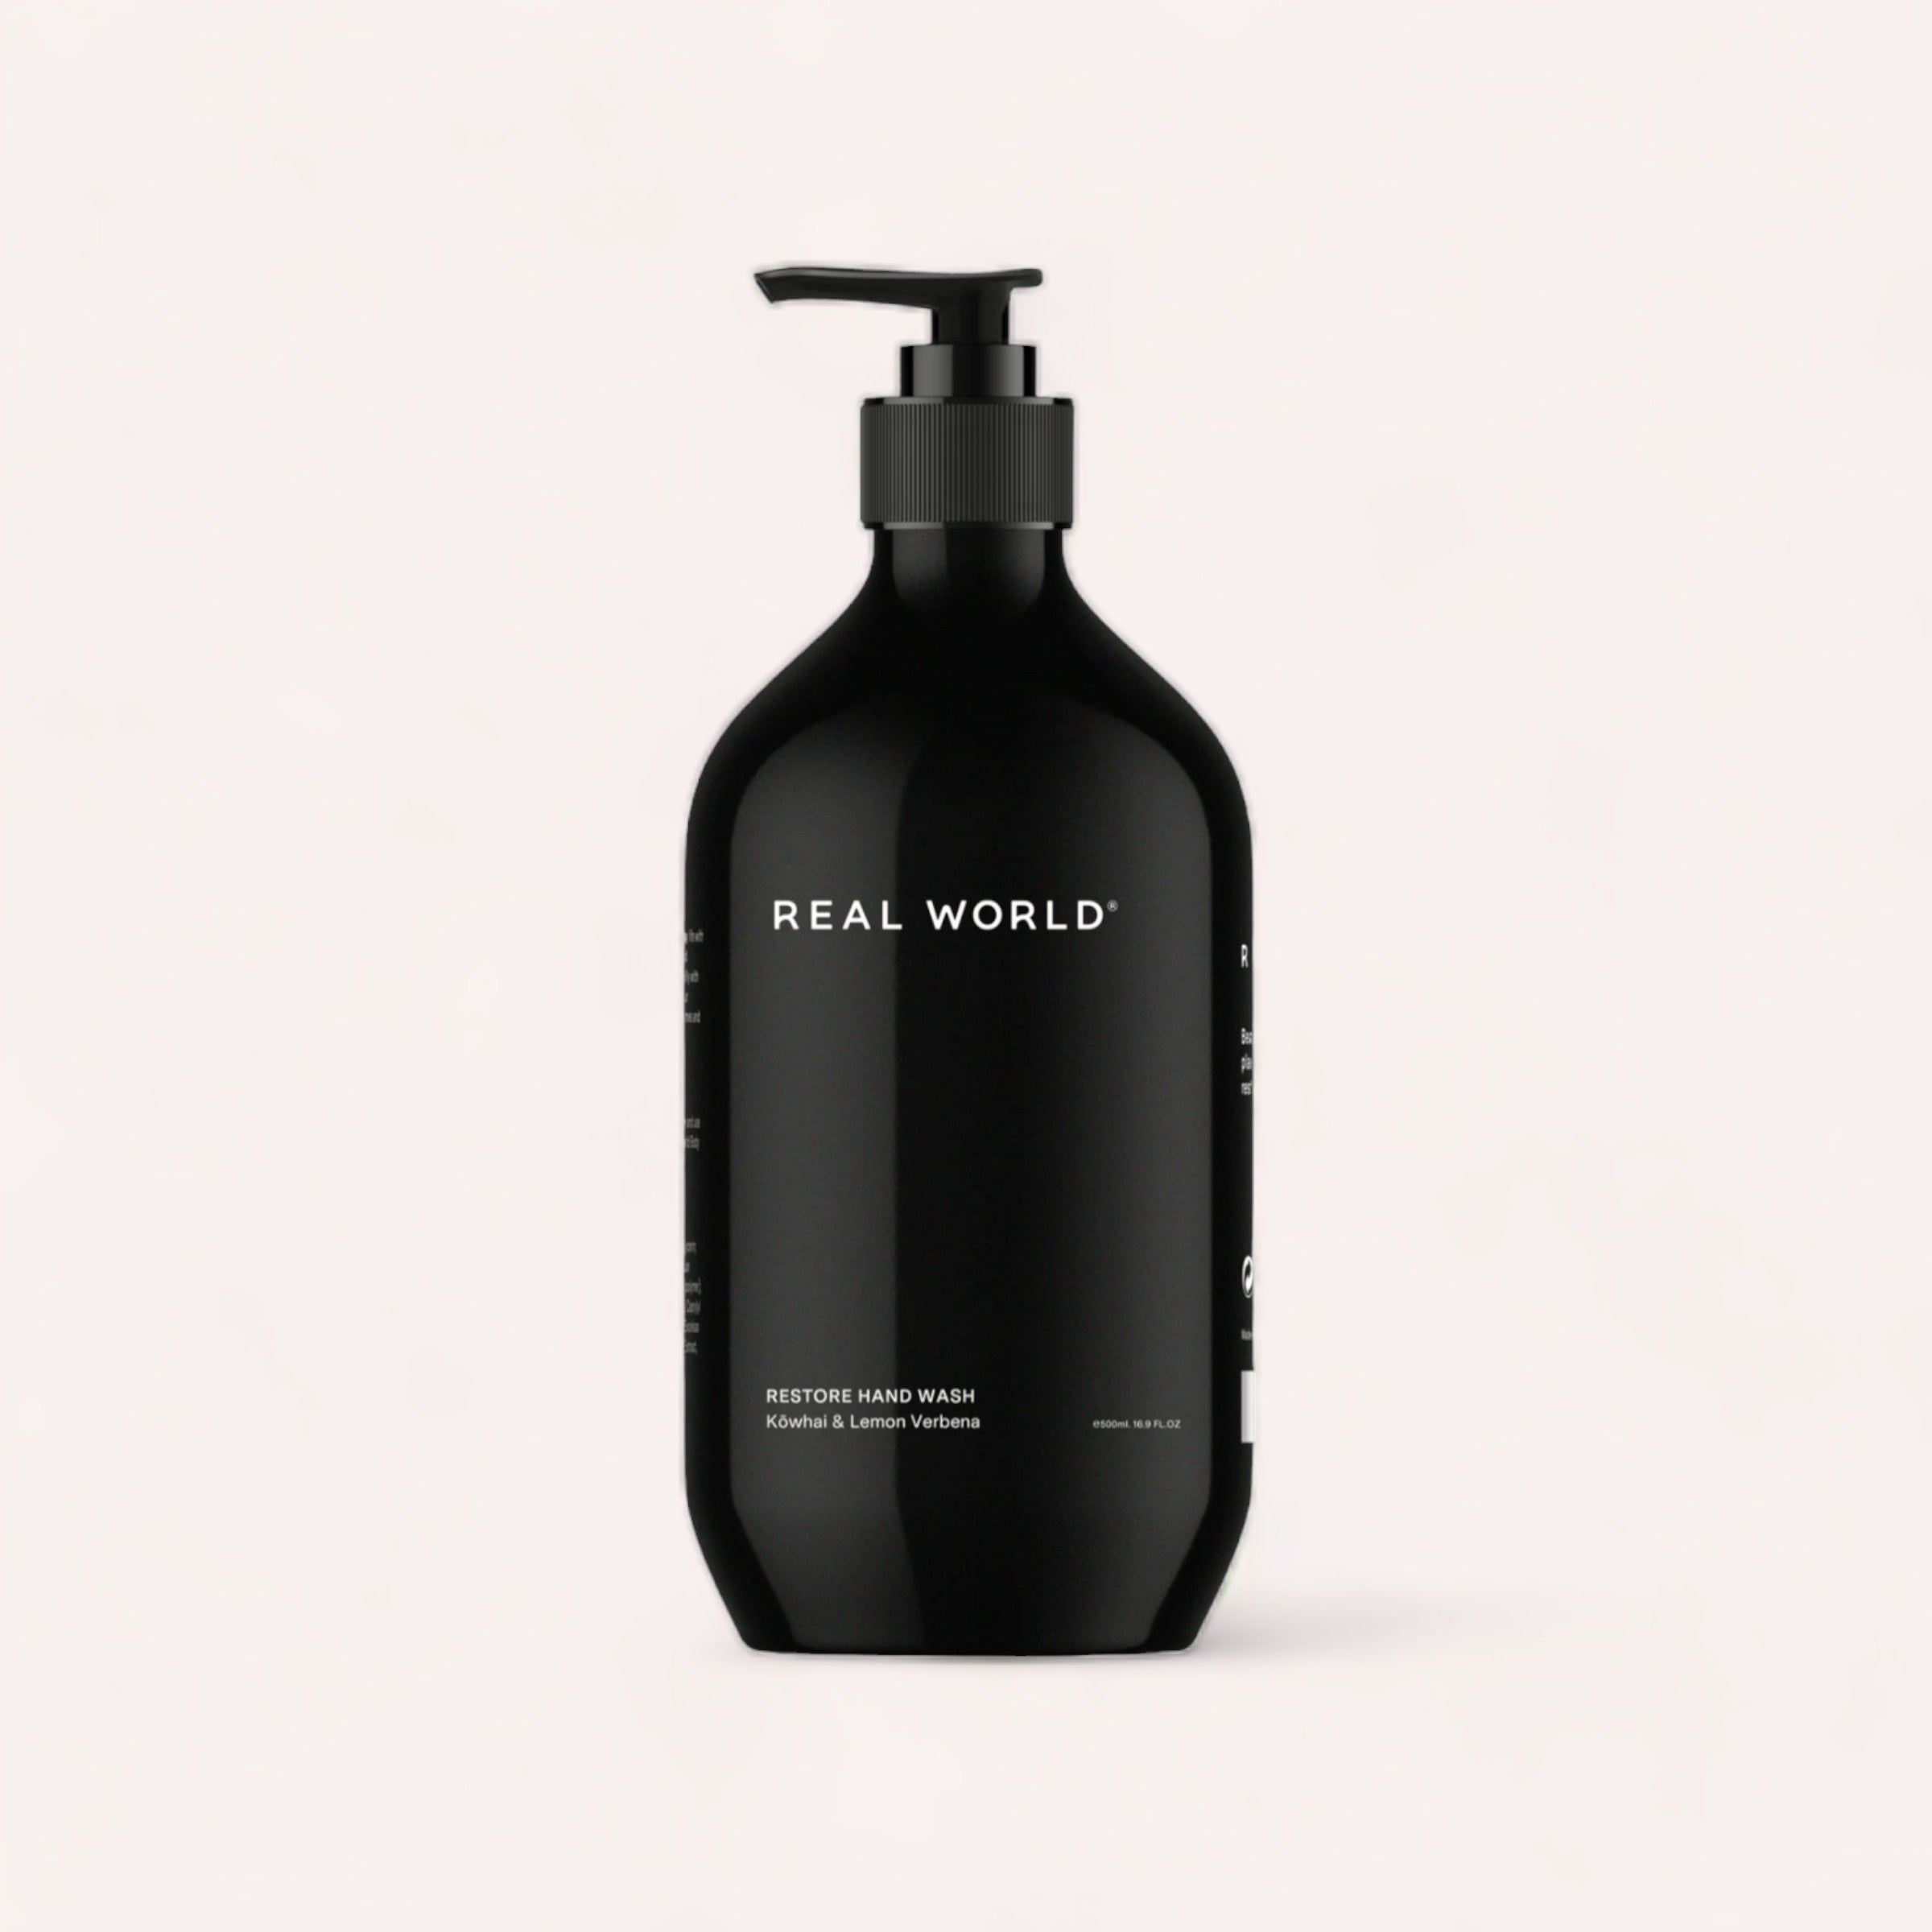 A sleek black bottle of Hand Wash - Kowhai & Lemon Verbena by Real World with a pump dispenser, labeled "Hand Wash - Kowhai & Lemon Verbena by Real World" against a clean, white background.